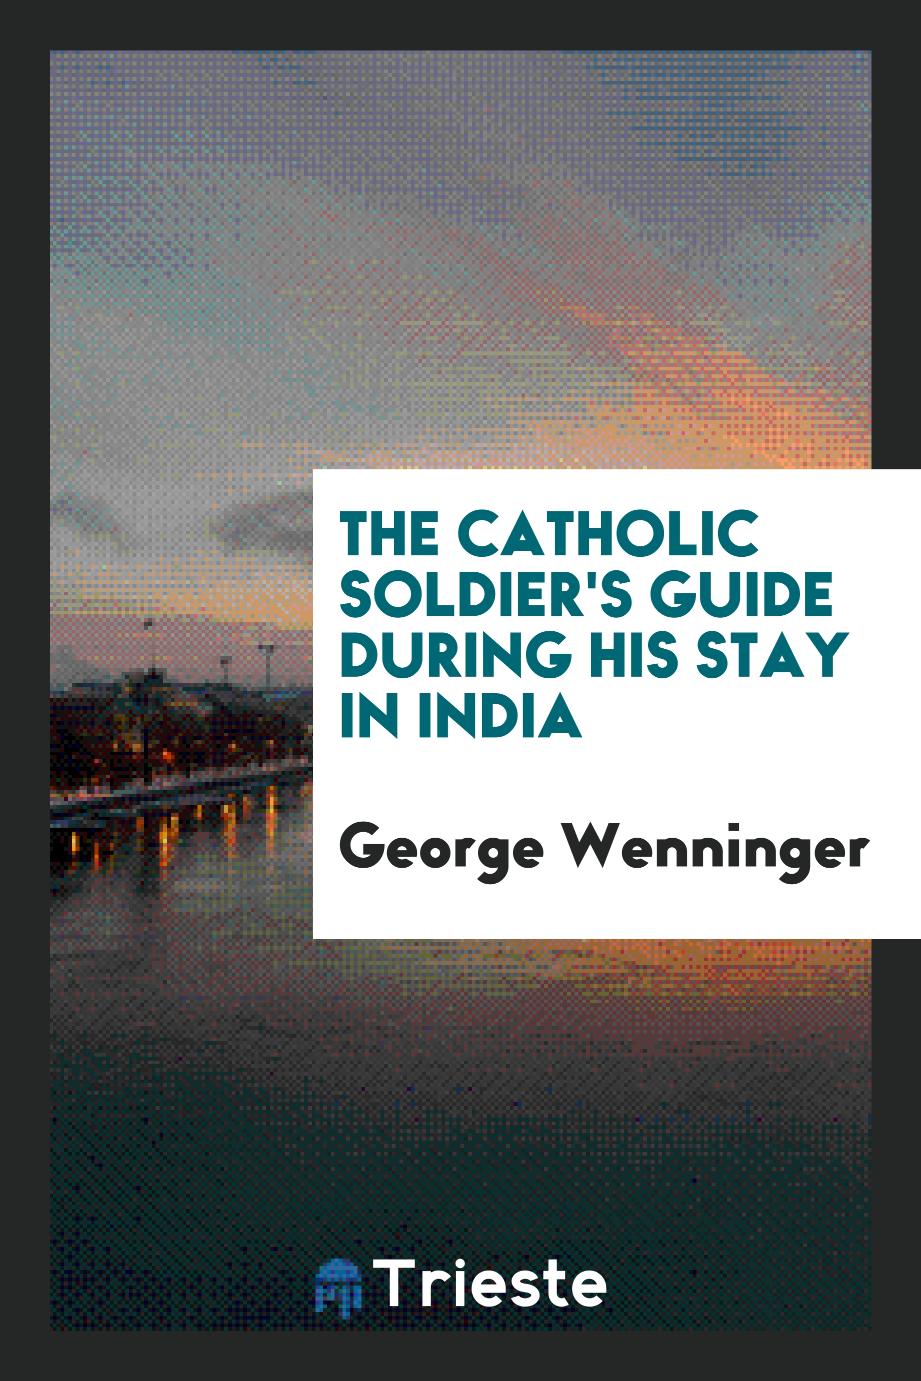 The Catholic soldier's guide during his stay in India